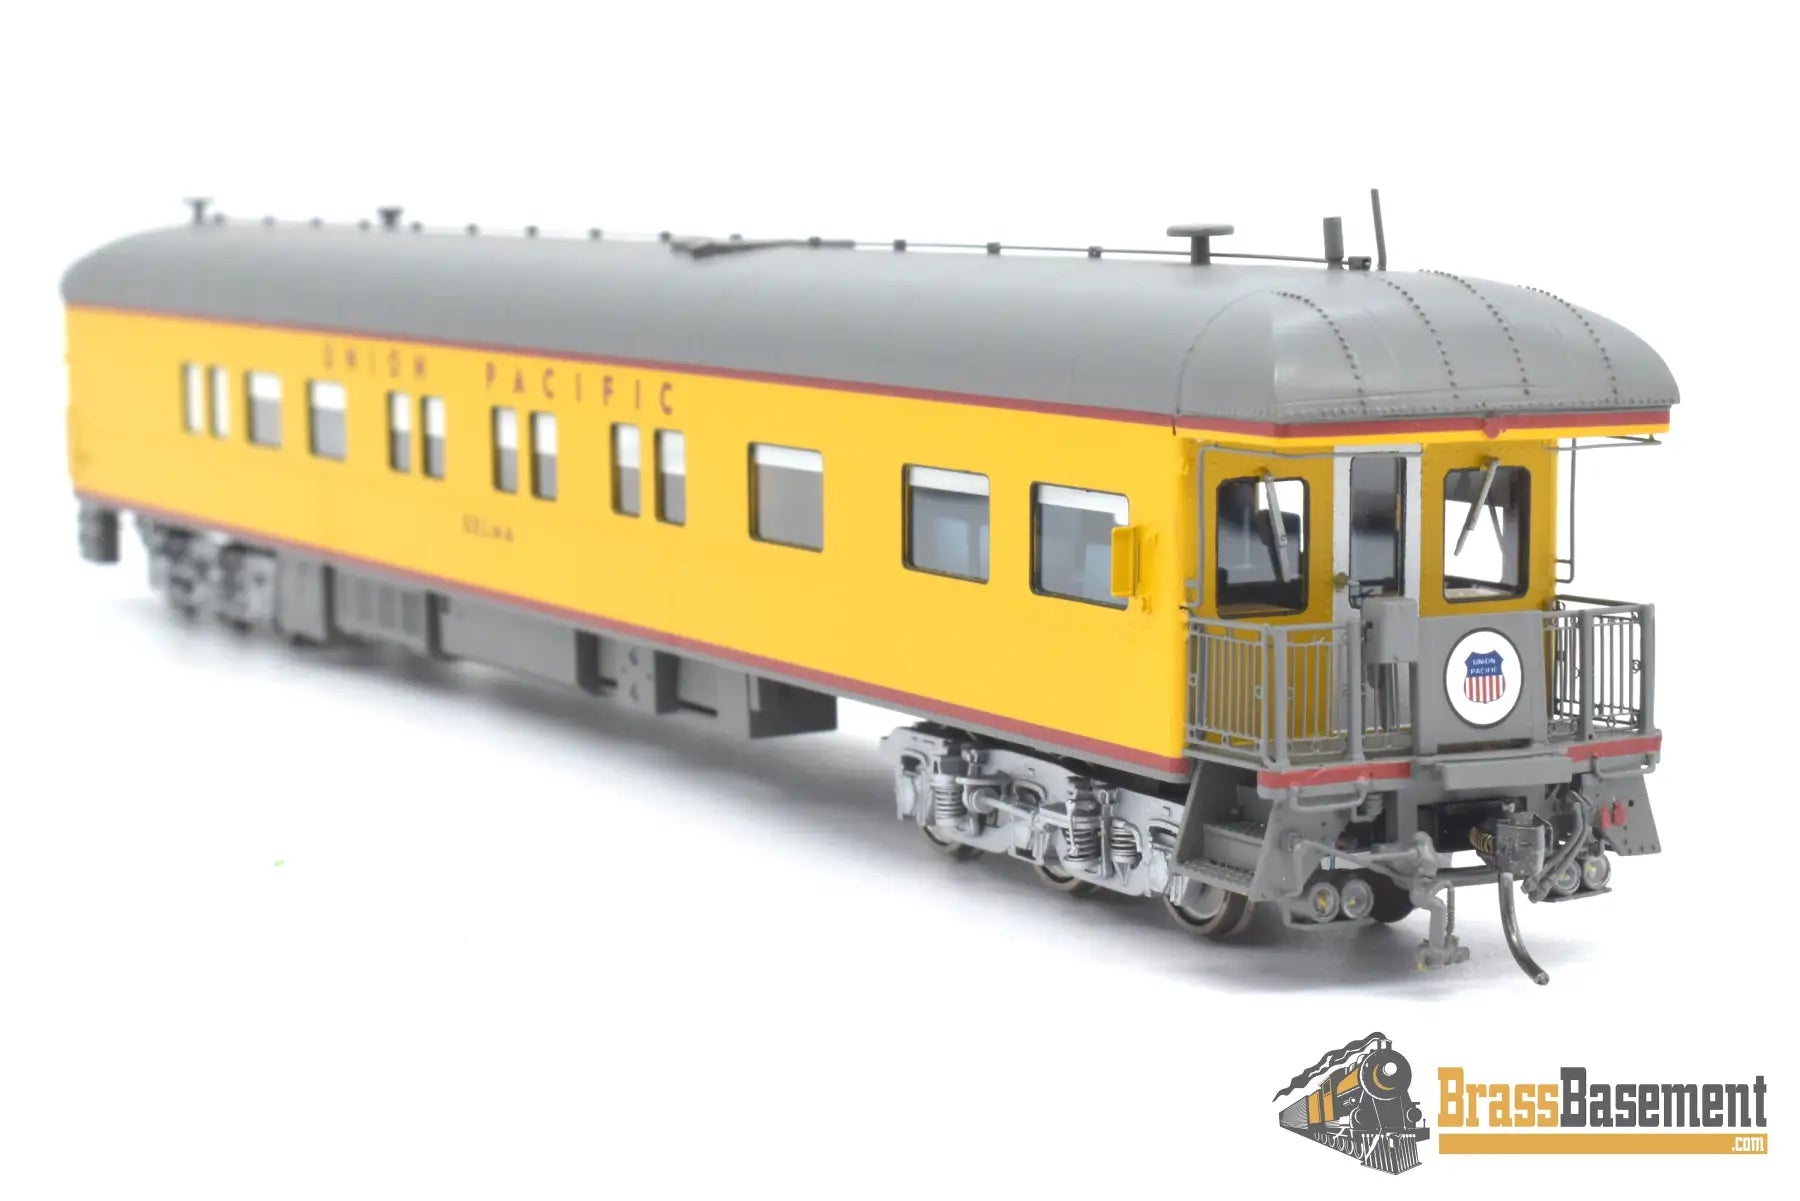 Ho Brass - North Bank Line Nbl Up Union Pacific ’Selma’ 1987 - Mid 90S Version Brand New Last